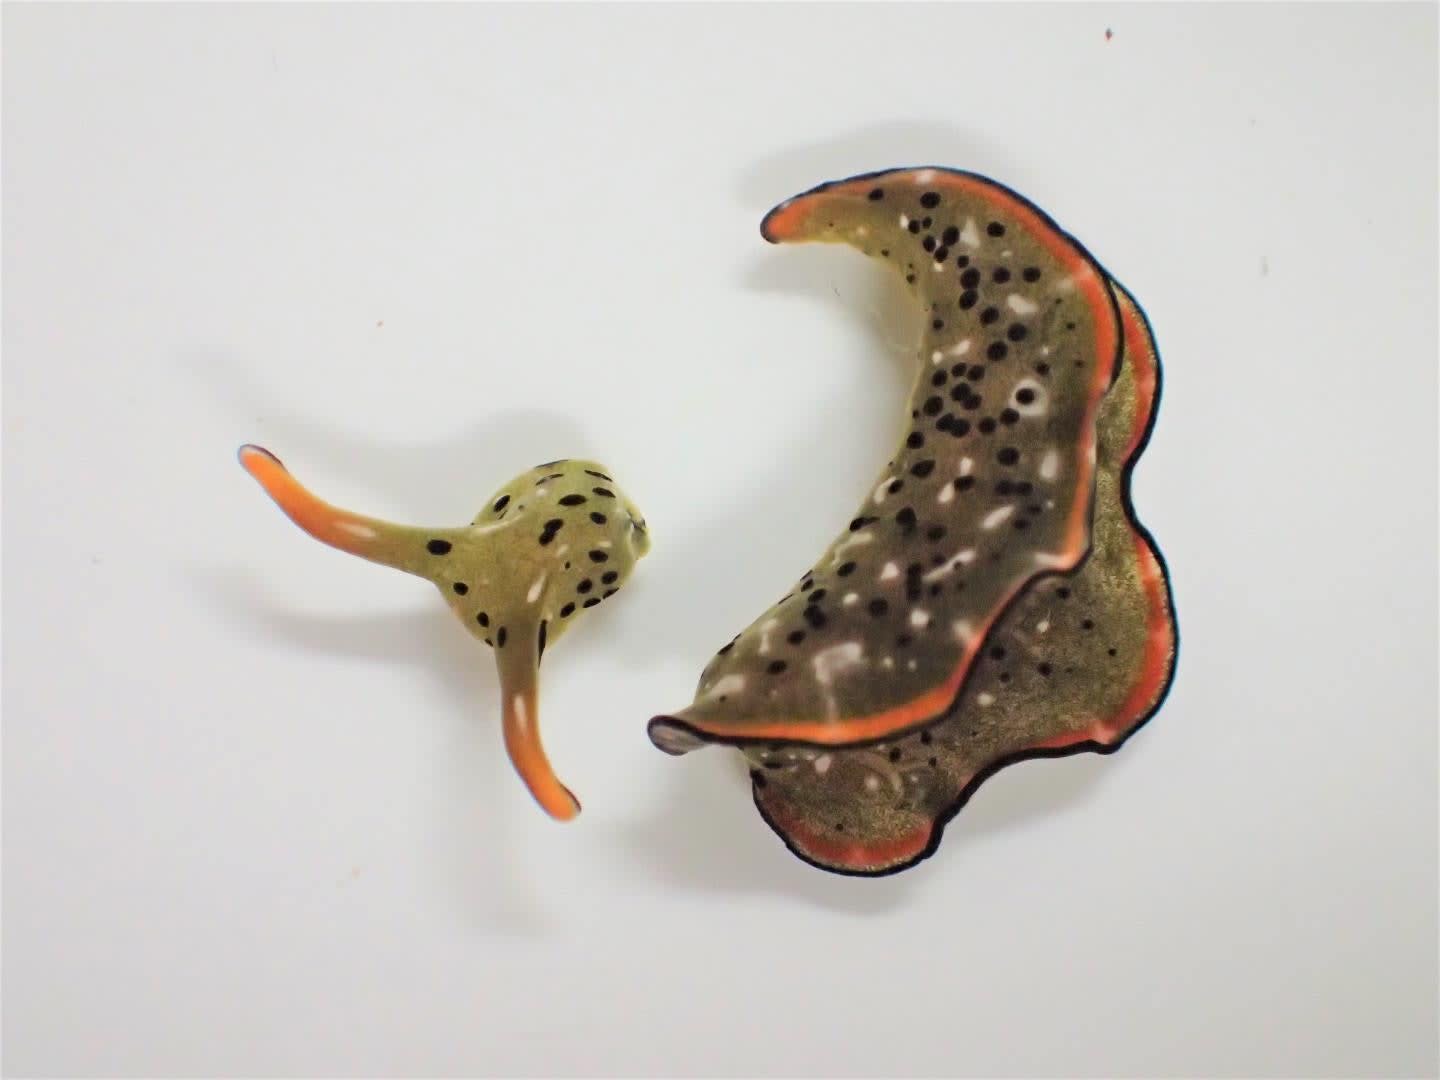 The process sea slugs use to regrow severed body parts is surprisingly common